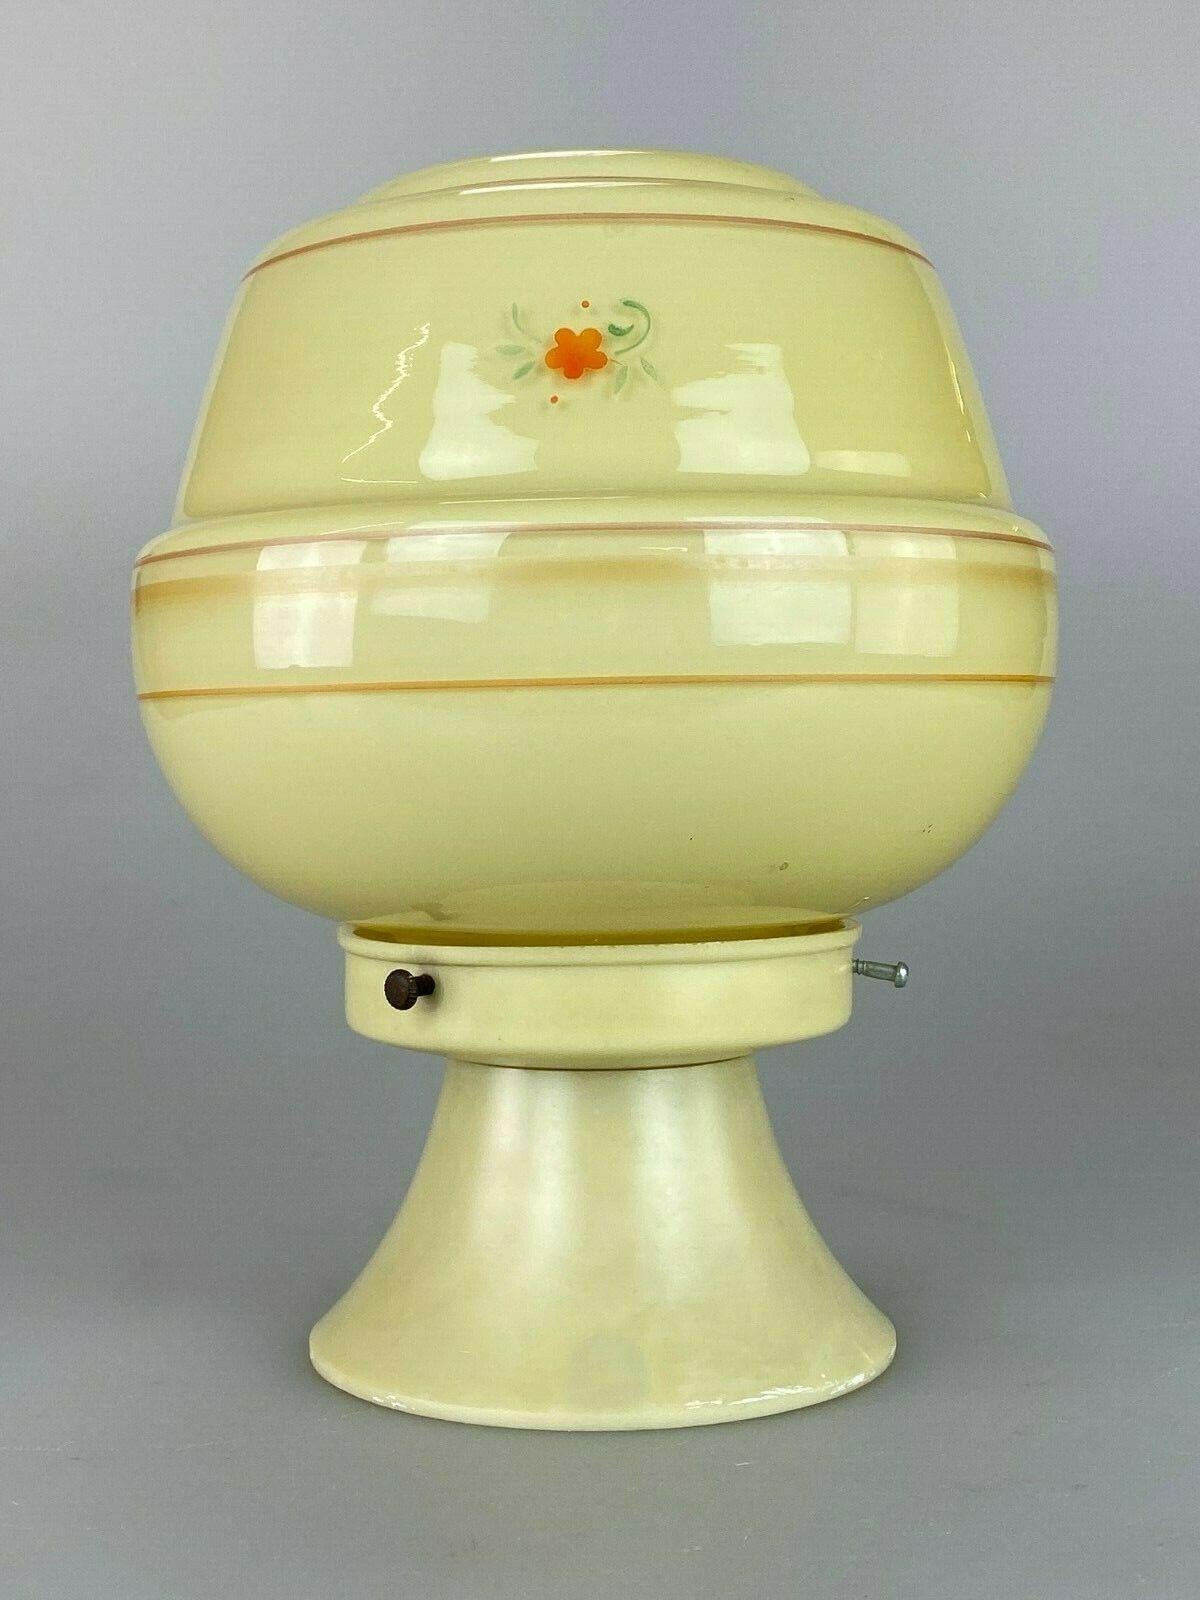 60s 70s Erco ceiling light ceiling light lamp light glass Plafoniere

Object: ceiling lamp

Manufacturer: Erco

Condition: good

Age: around 1960-1970

Dimensions:

Diameter = 15.5cm
Height = 20cm

Other notes:

The pictures serve